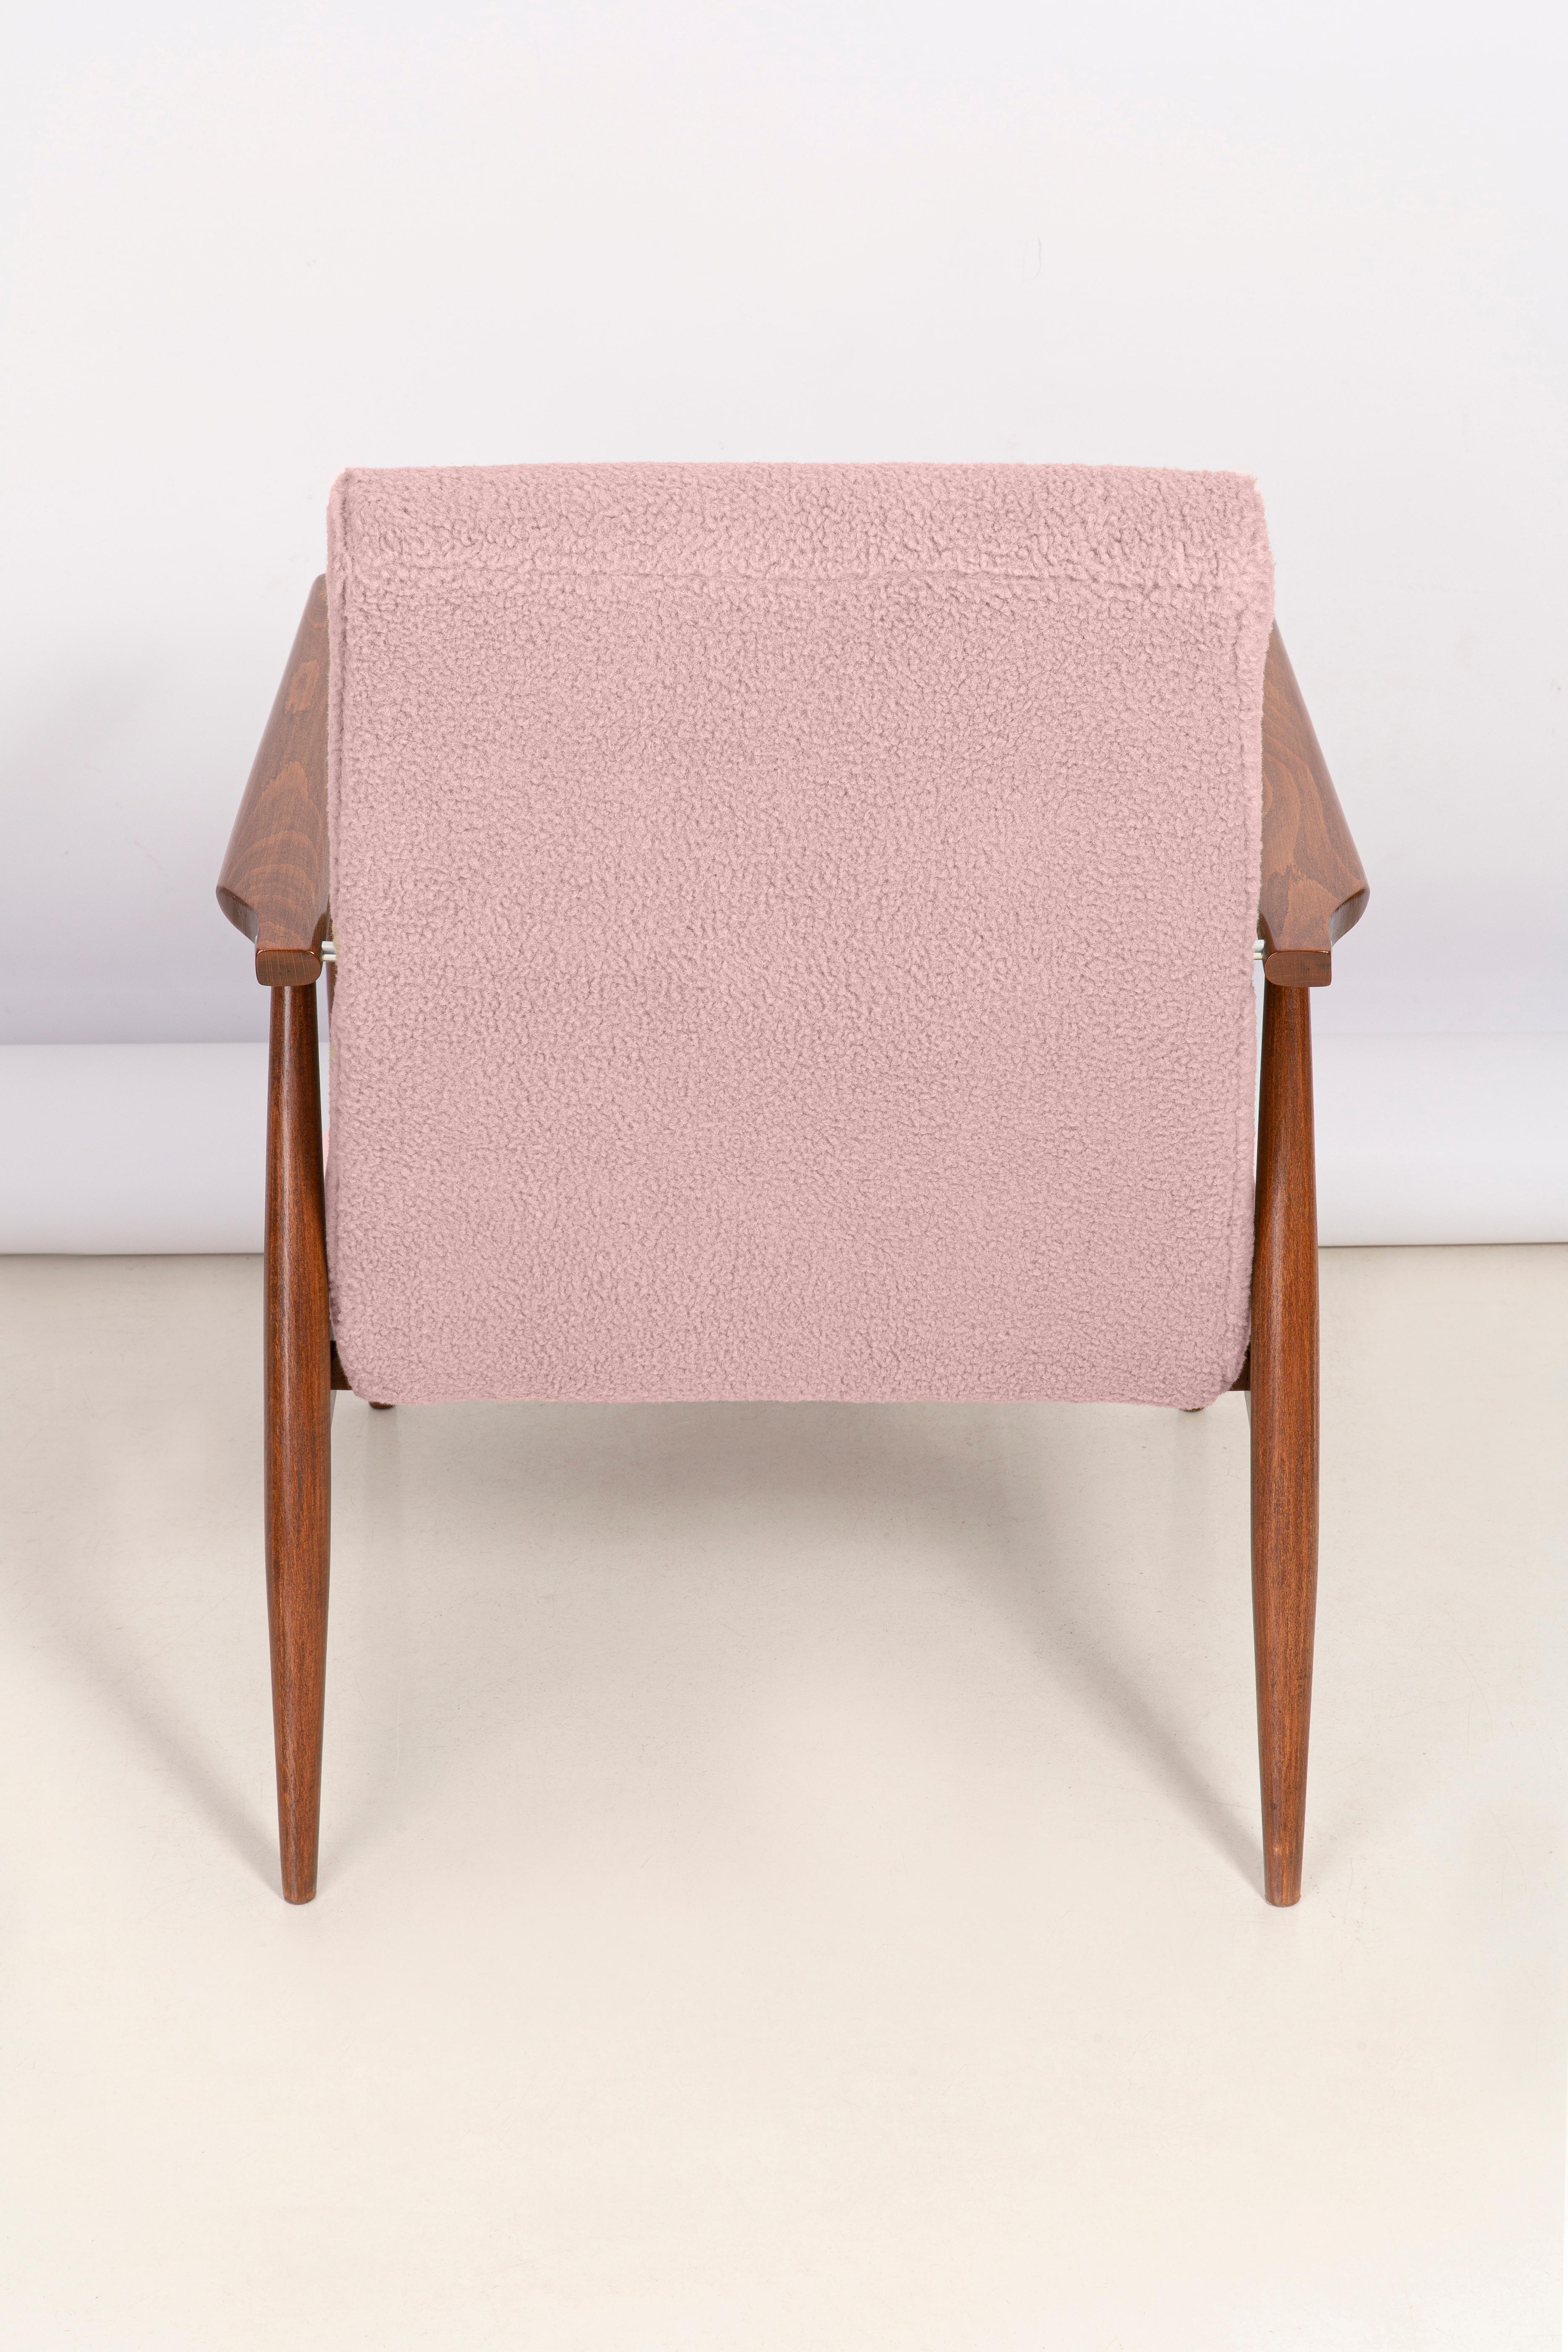 Pair of Dusty Pink Bouclé Dante Armchairs, H. Lis, Europe, 1960s For Sale 7